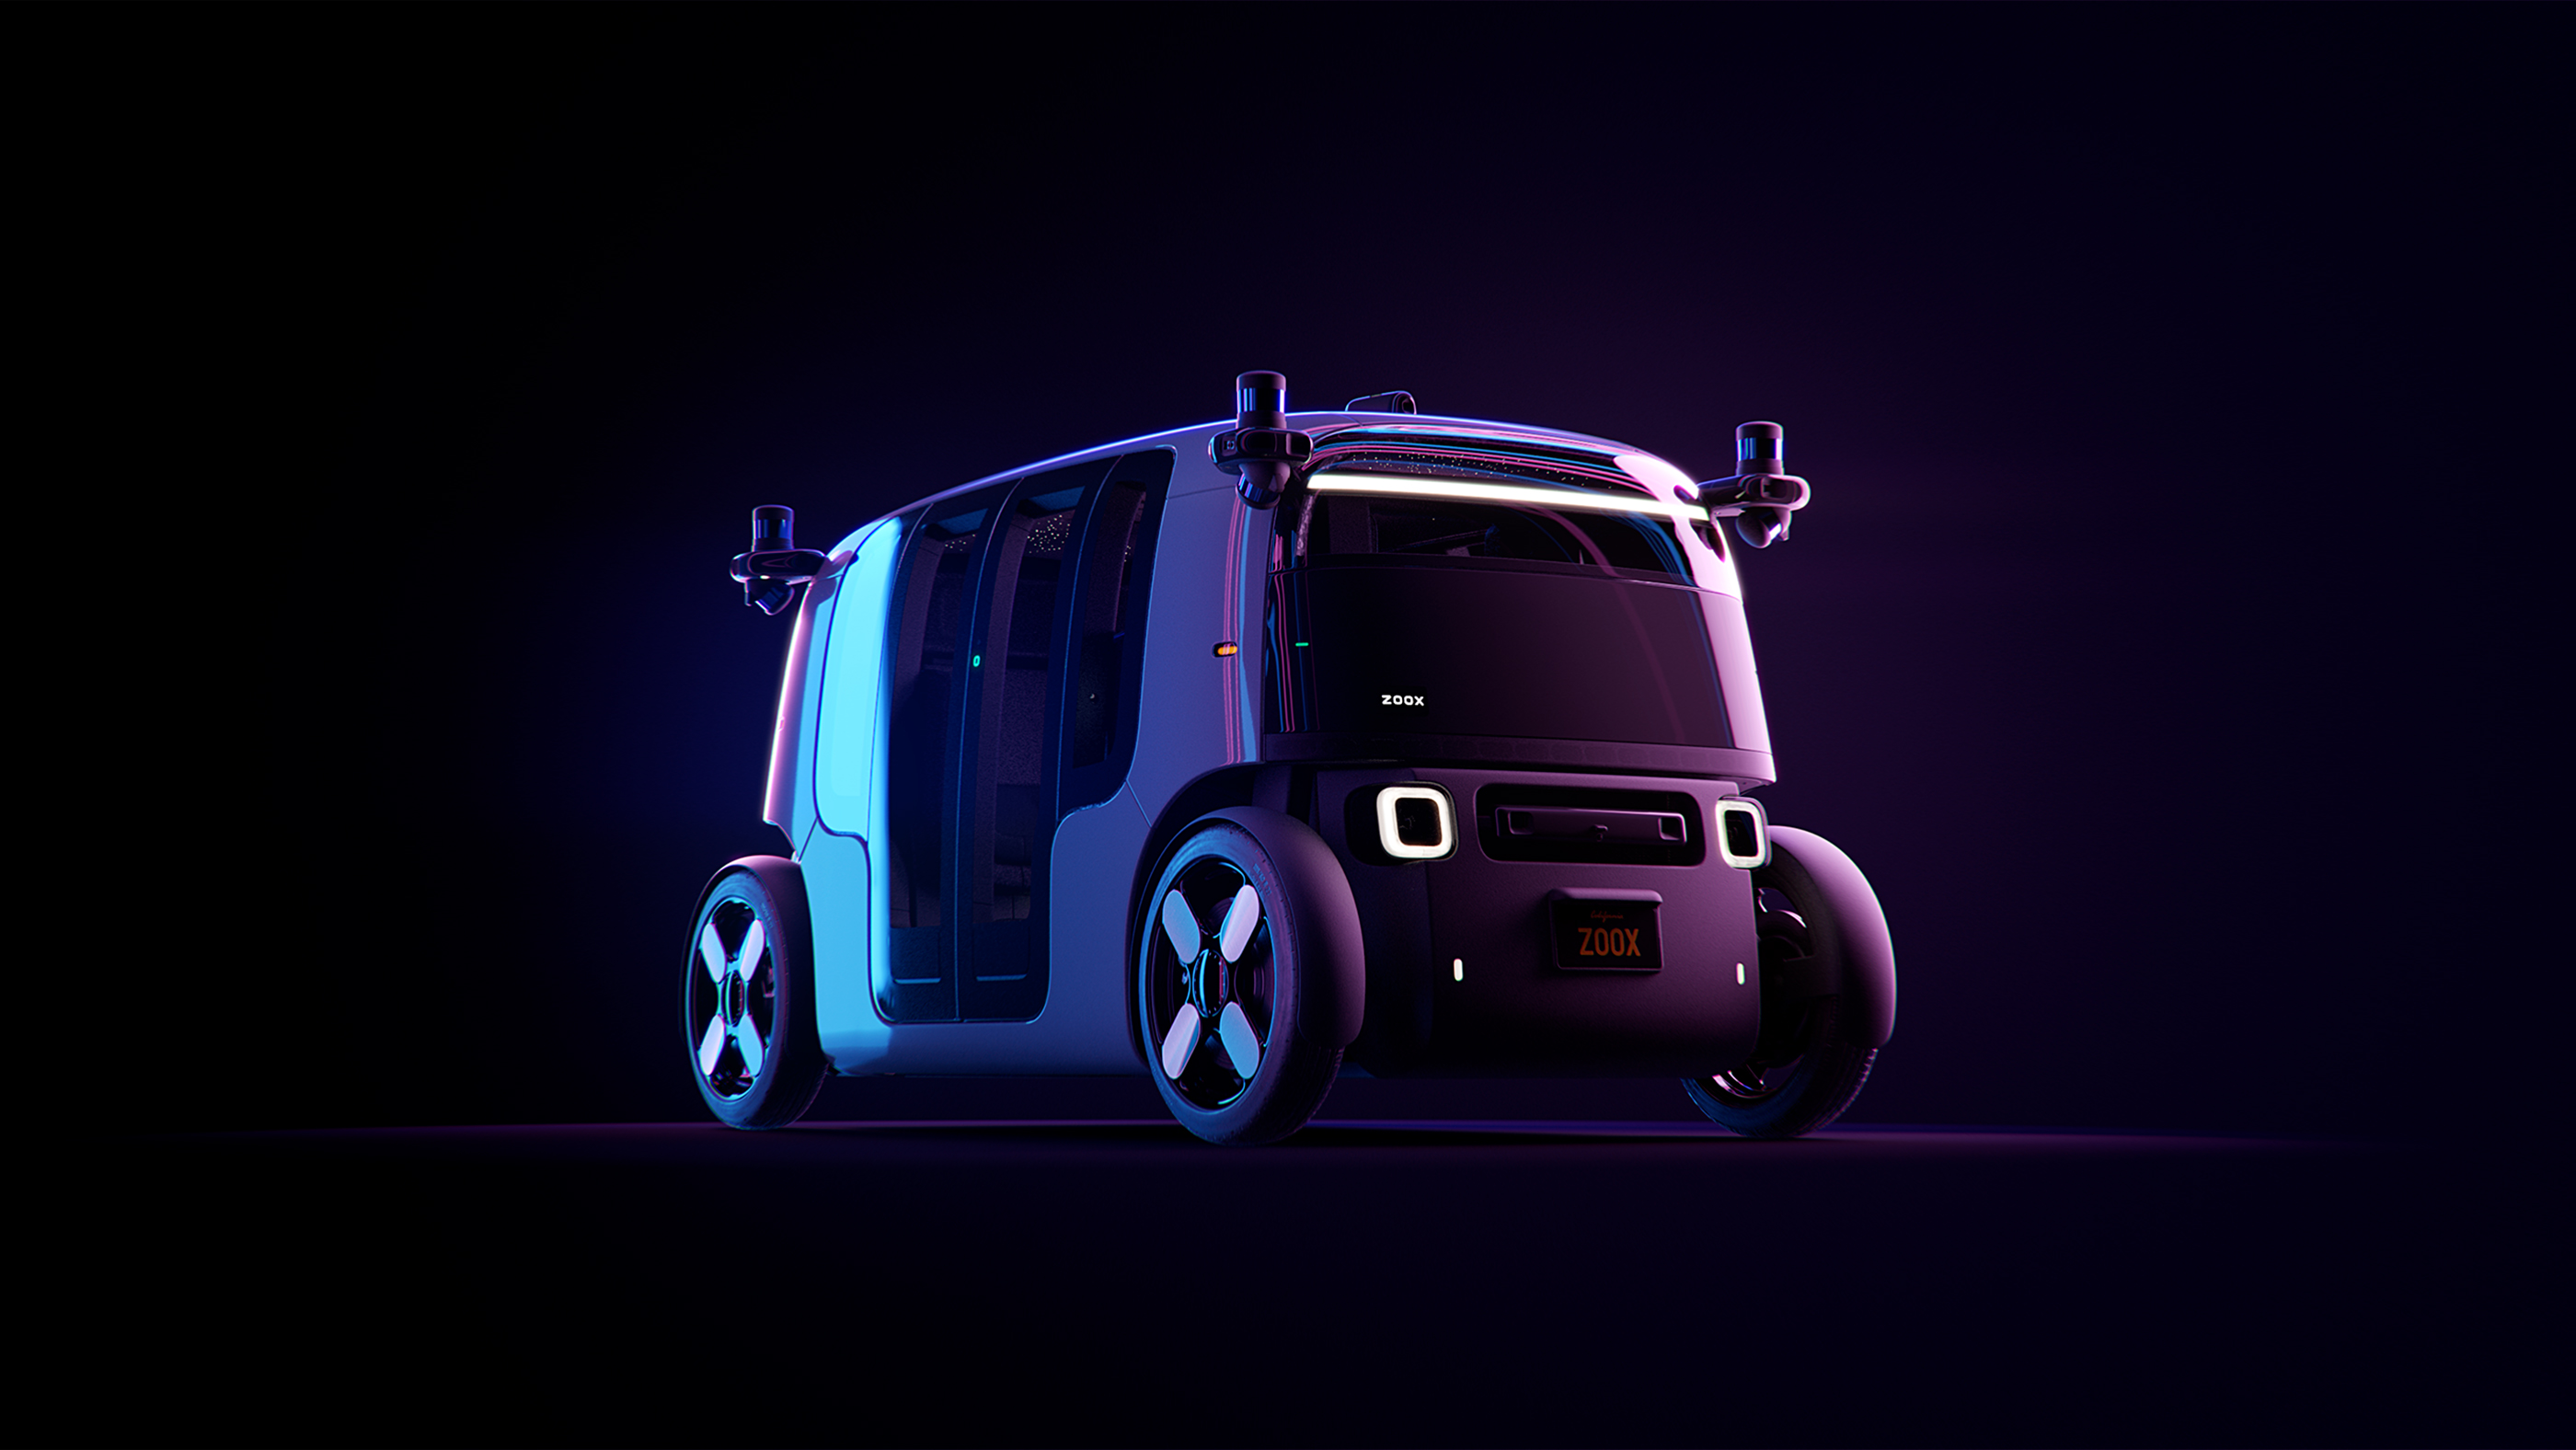 Zoox - a carriage-style autonomous vehicle with more than 100 proprietary safety innovations, built for ride hailing